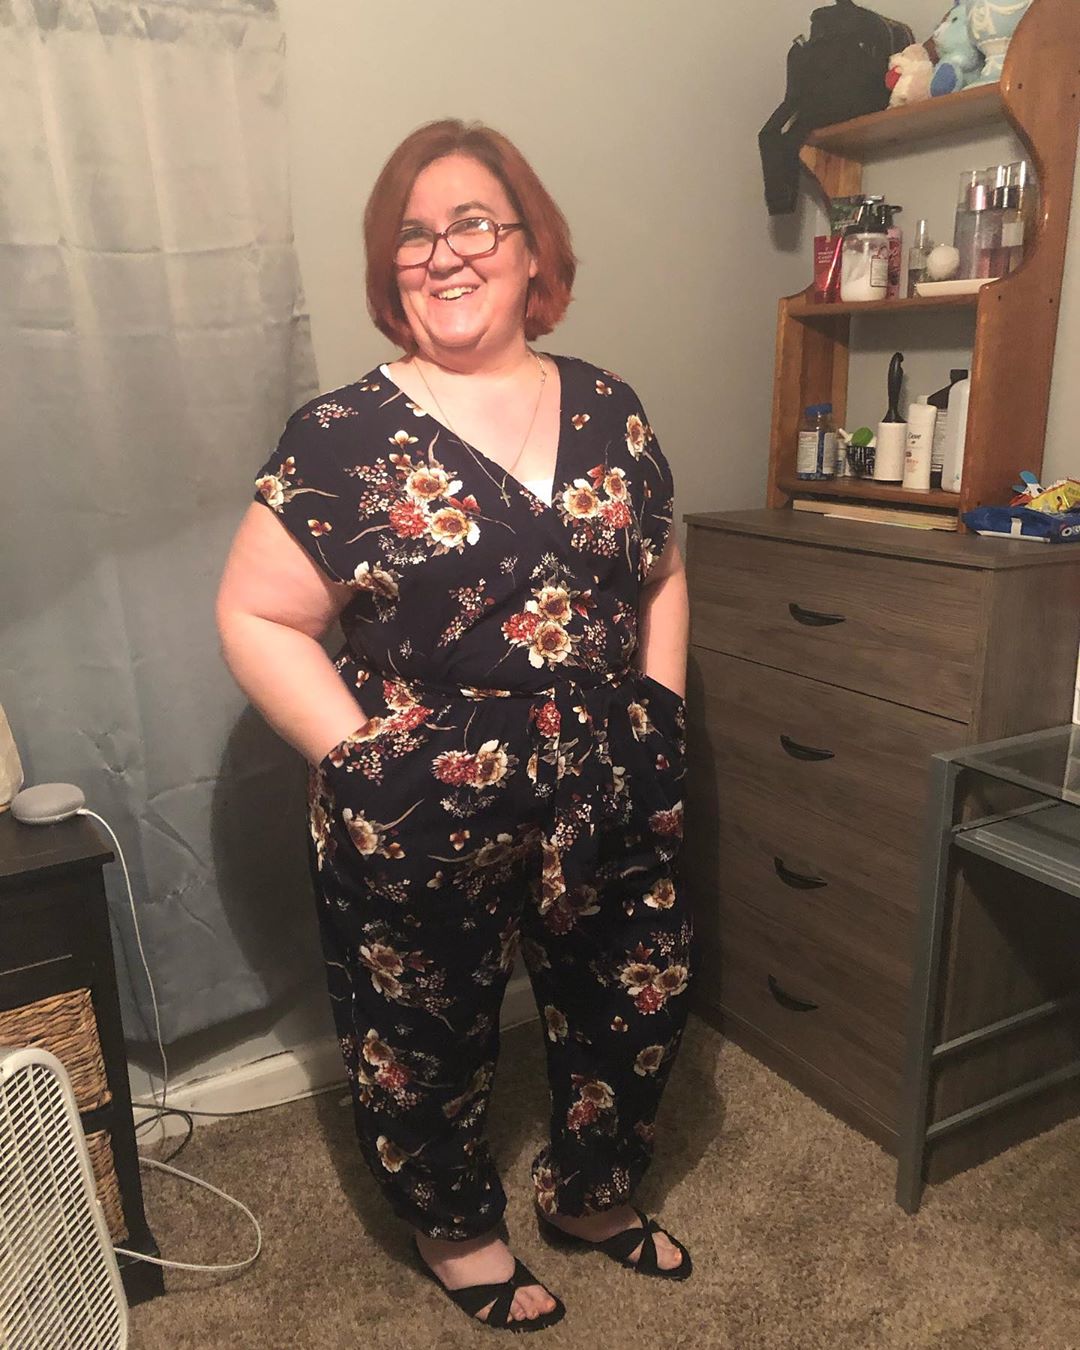 '90 Day Fiance': Danielle Jbali's Weight Loss Transformation — Photos